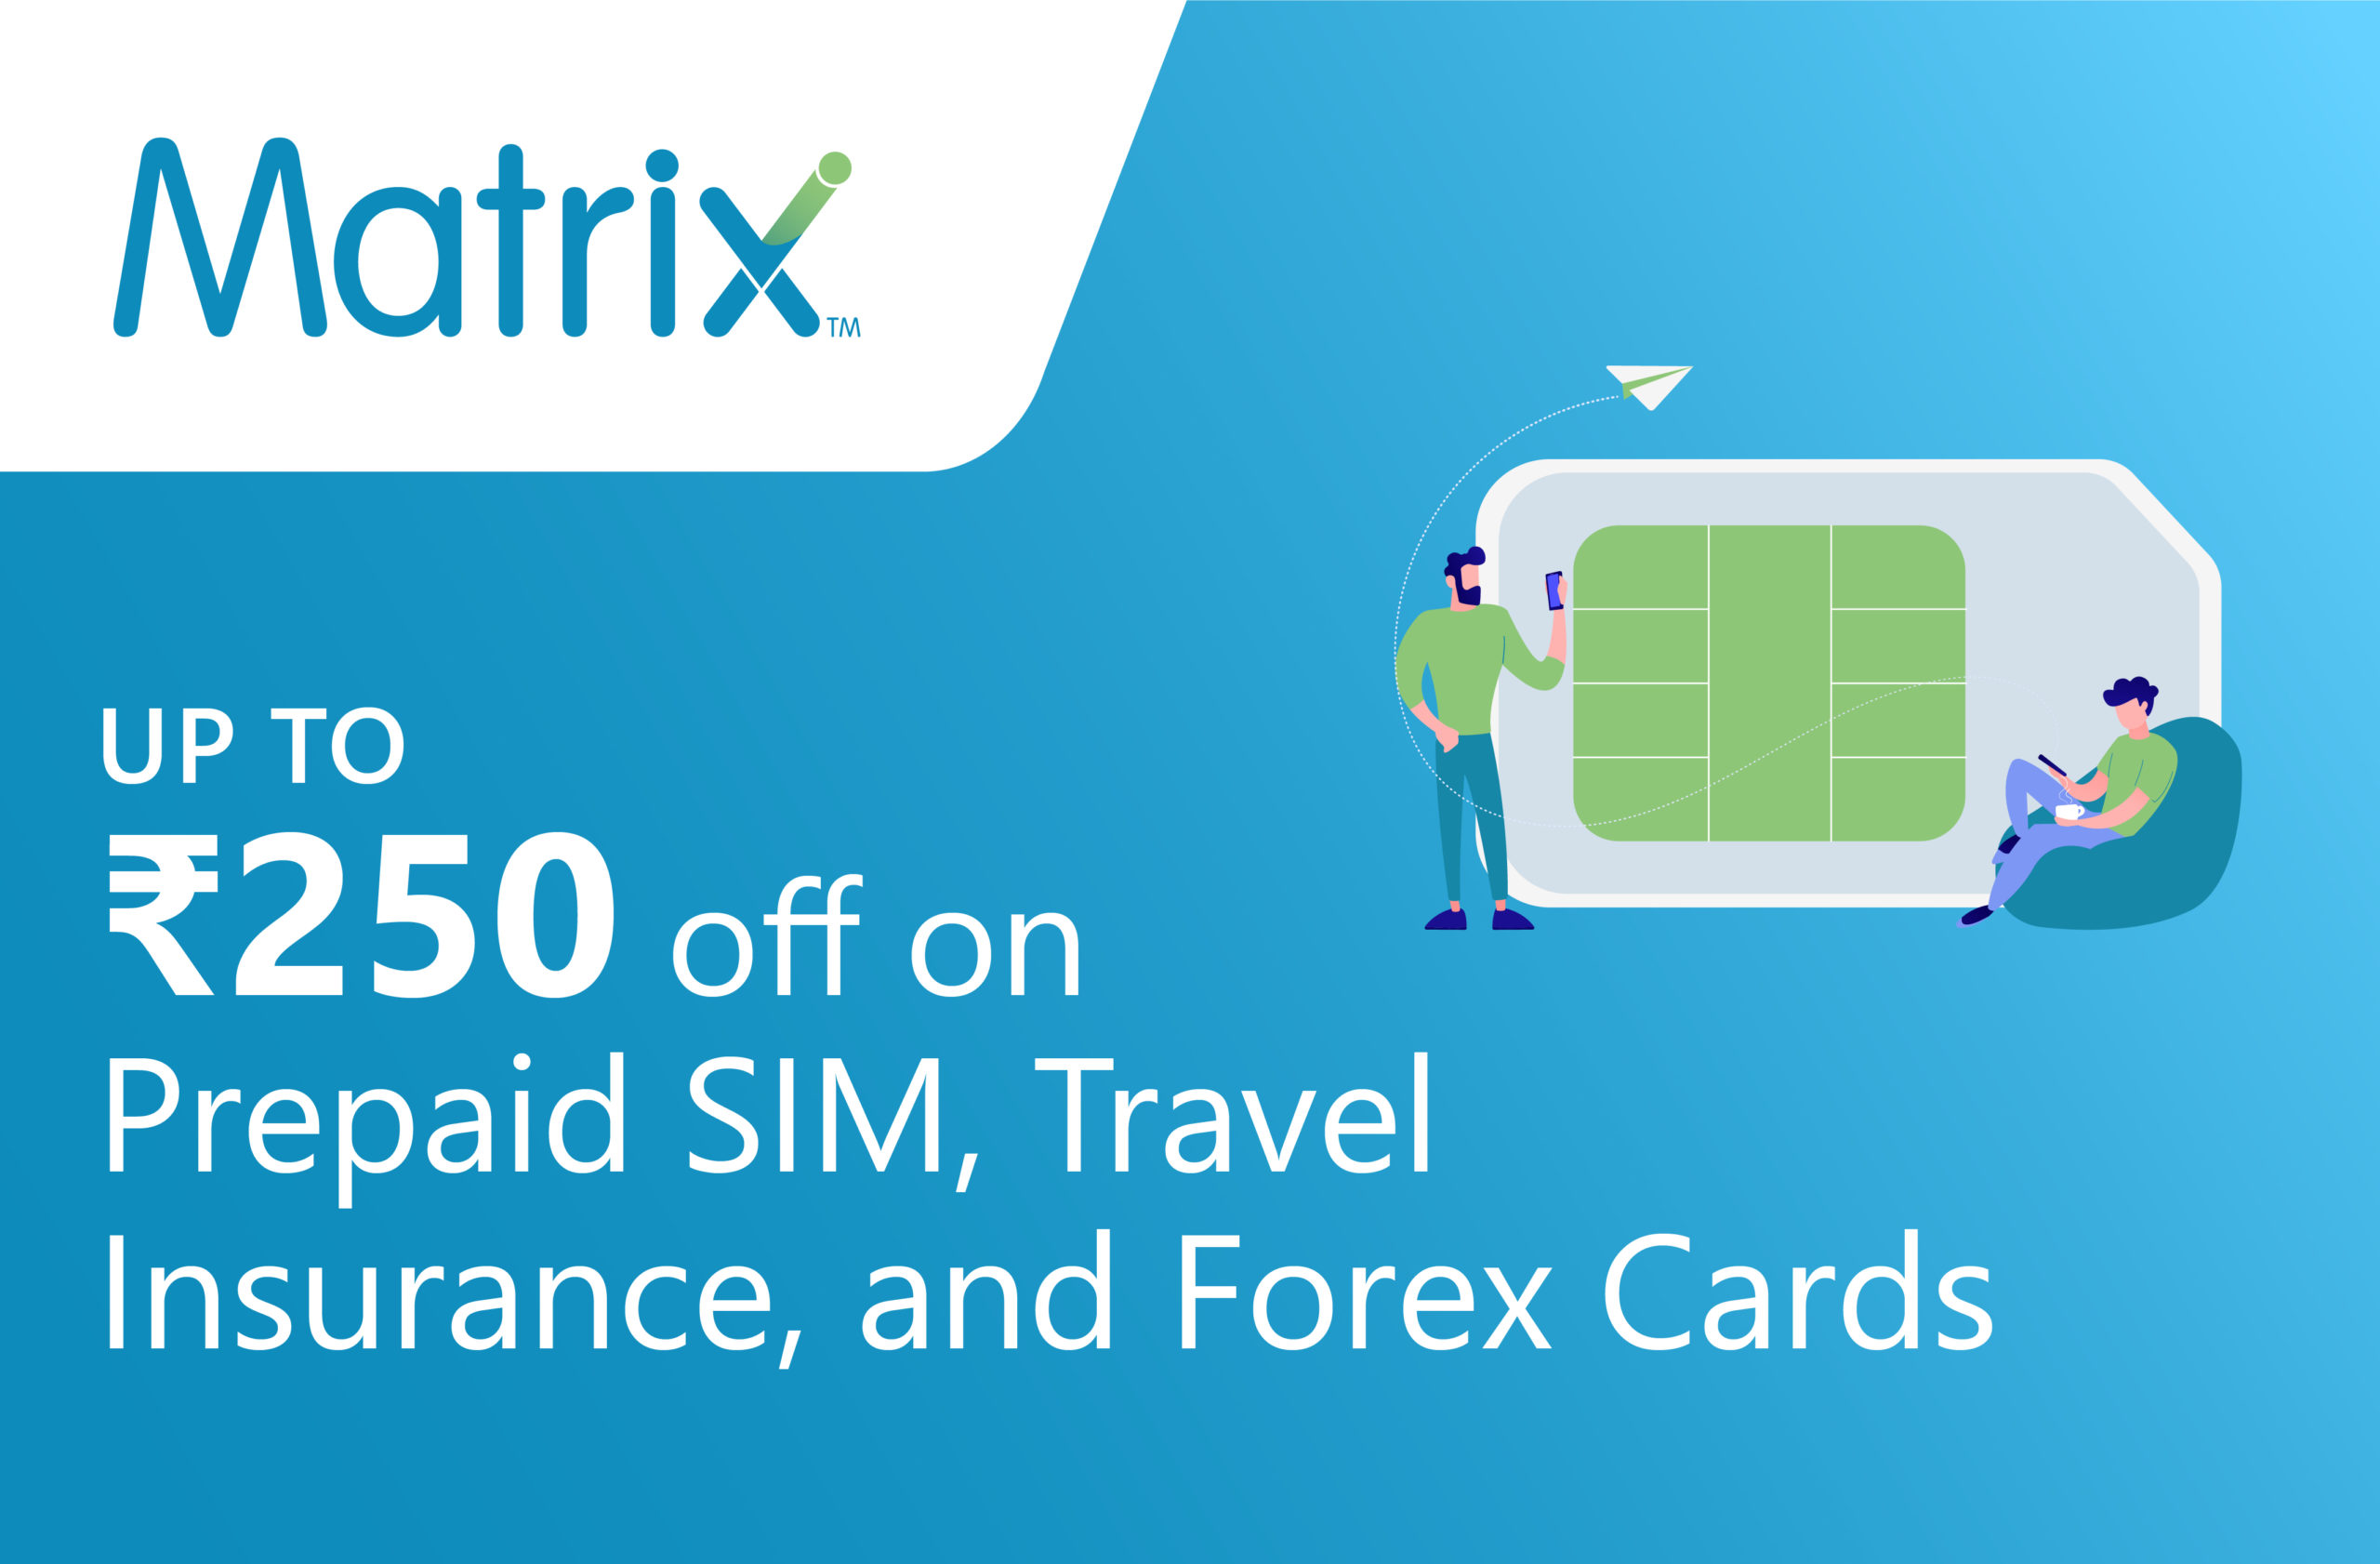 Upto Rs.250 off on Prepaid Sims and Travel Insurance